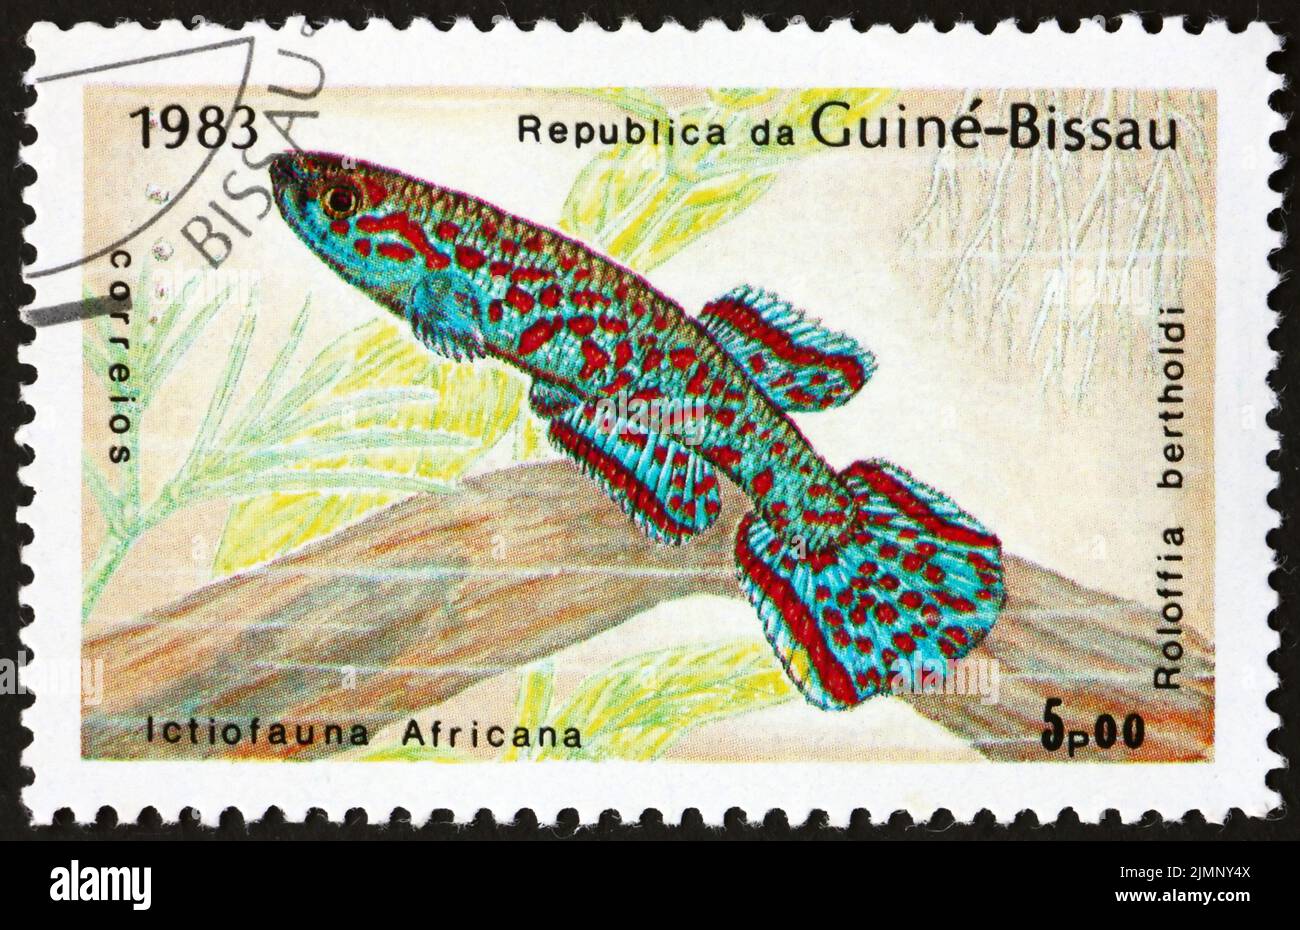 GUINEA-BISSAU - CIRCA 1983: a stamp printed in Guinea-Bissau shows roloffia bertholdi, is a genus of killifish which is endemic to Africa, circa 1983 Stock Photo